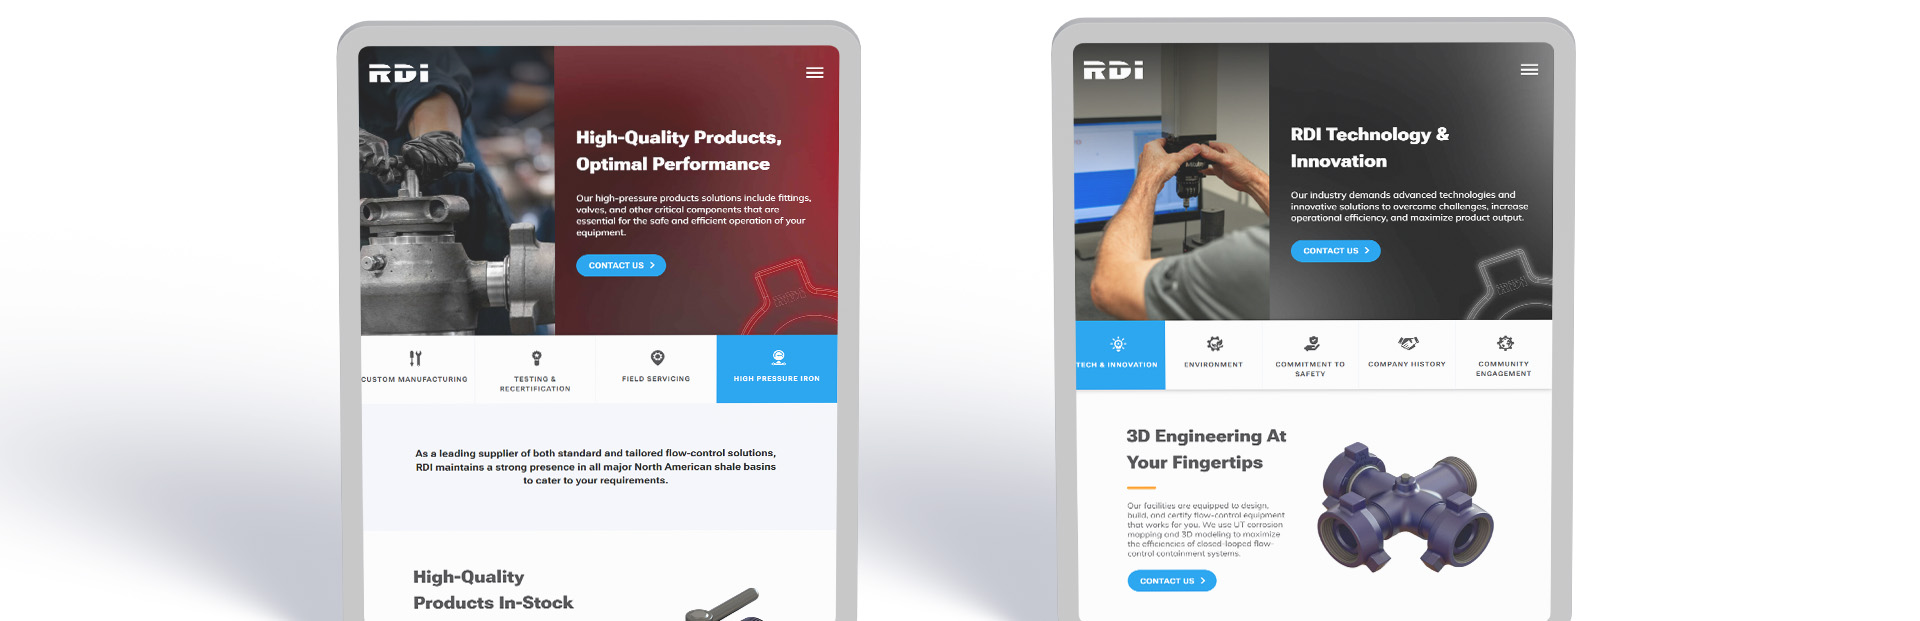 Two tablets displaying RDI's updated website pages with a focus on high-quality products for optimal performance and technology innovation, featuring images of industrial valve assembly and a technician calibrating equipment